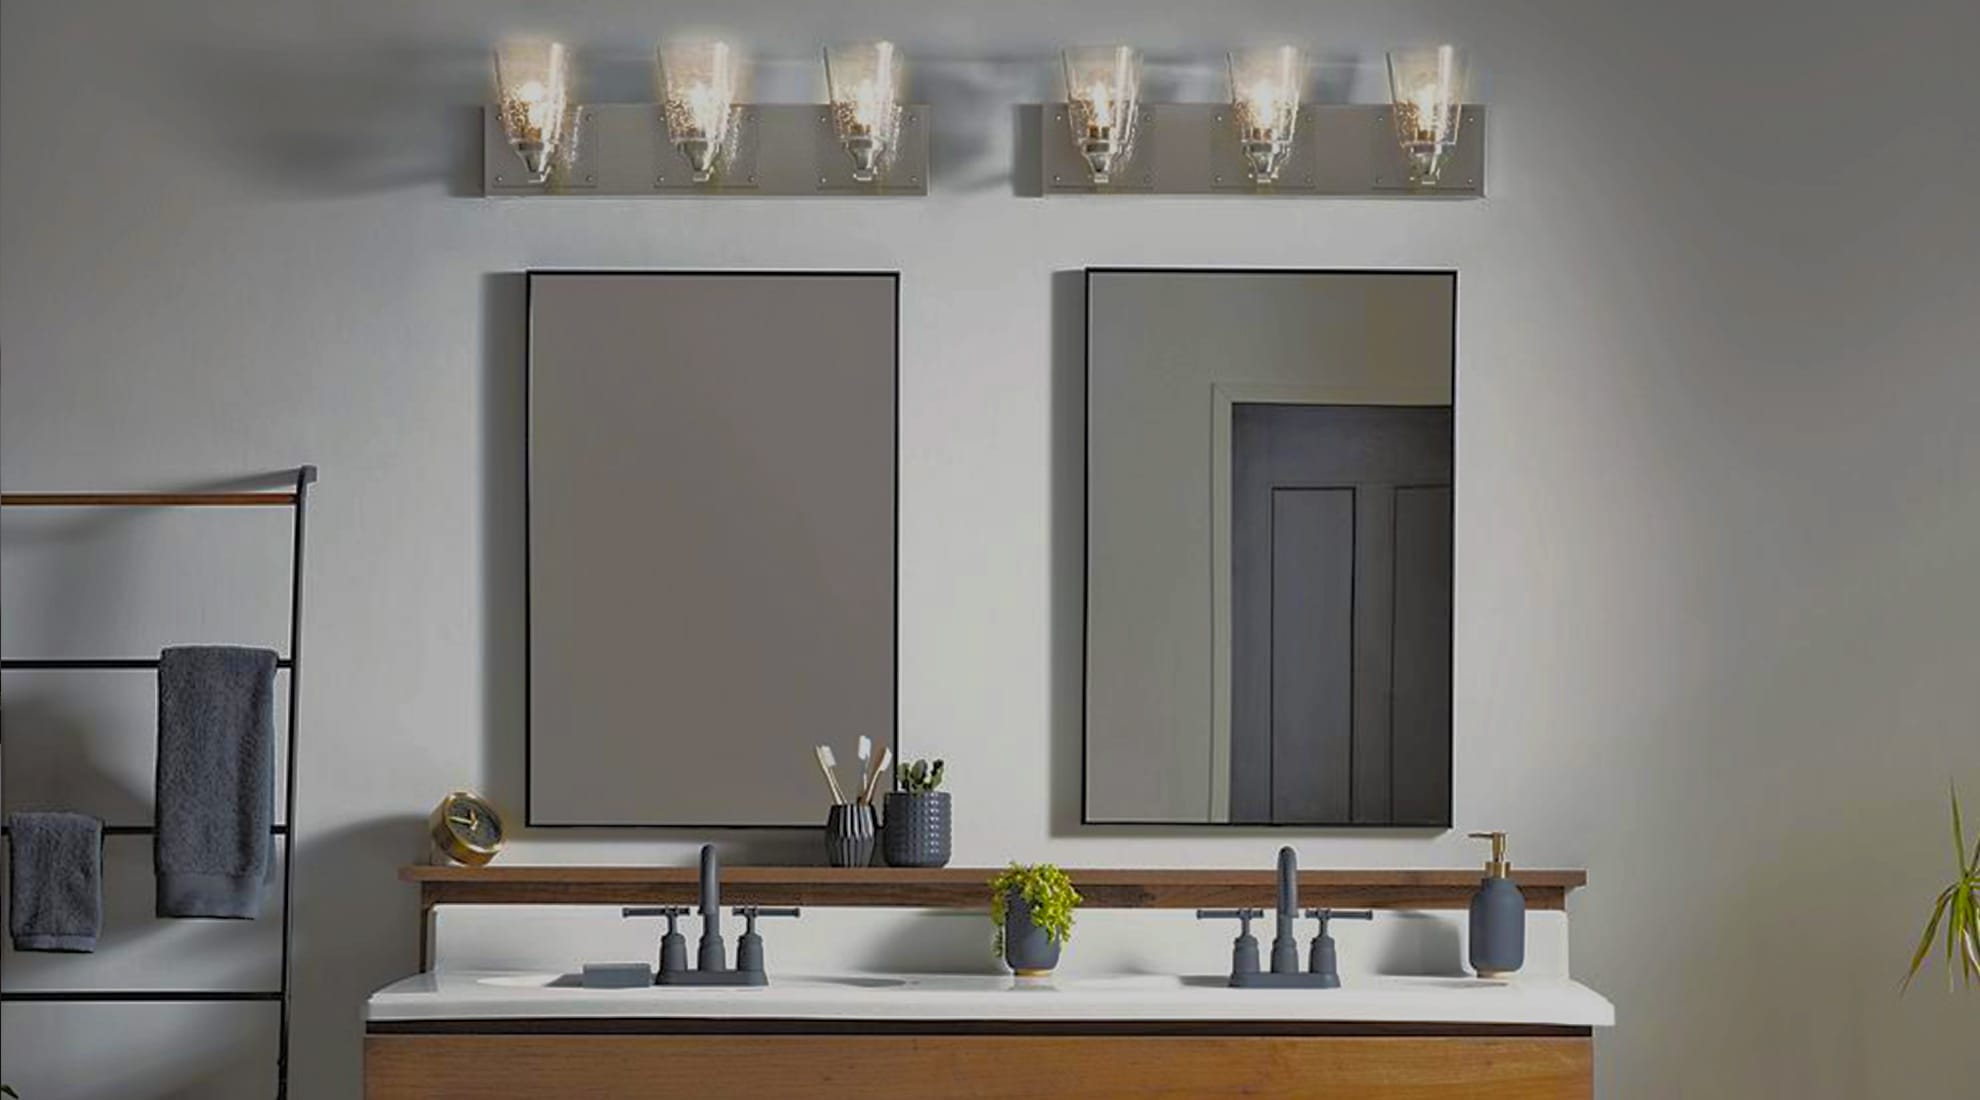 Vanity Lighting Er S Guide How To, What Size Mirror Should Go Over A 72 Inch Vanity